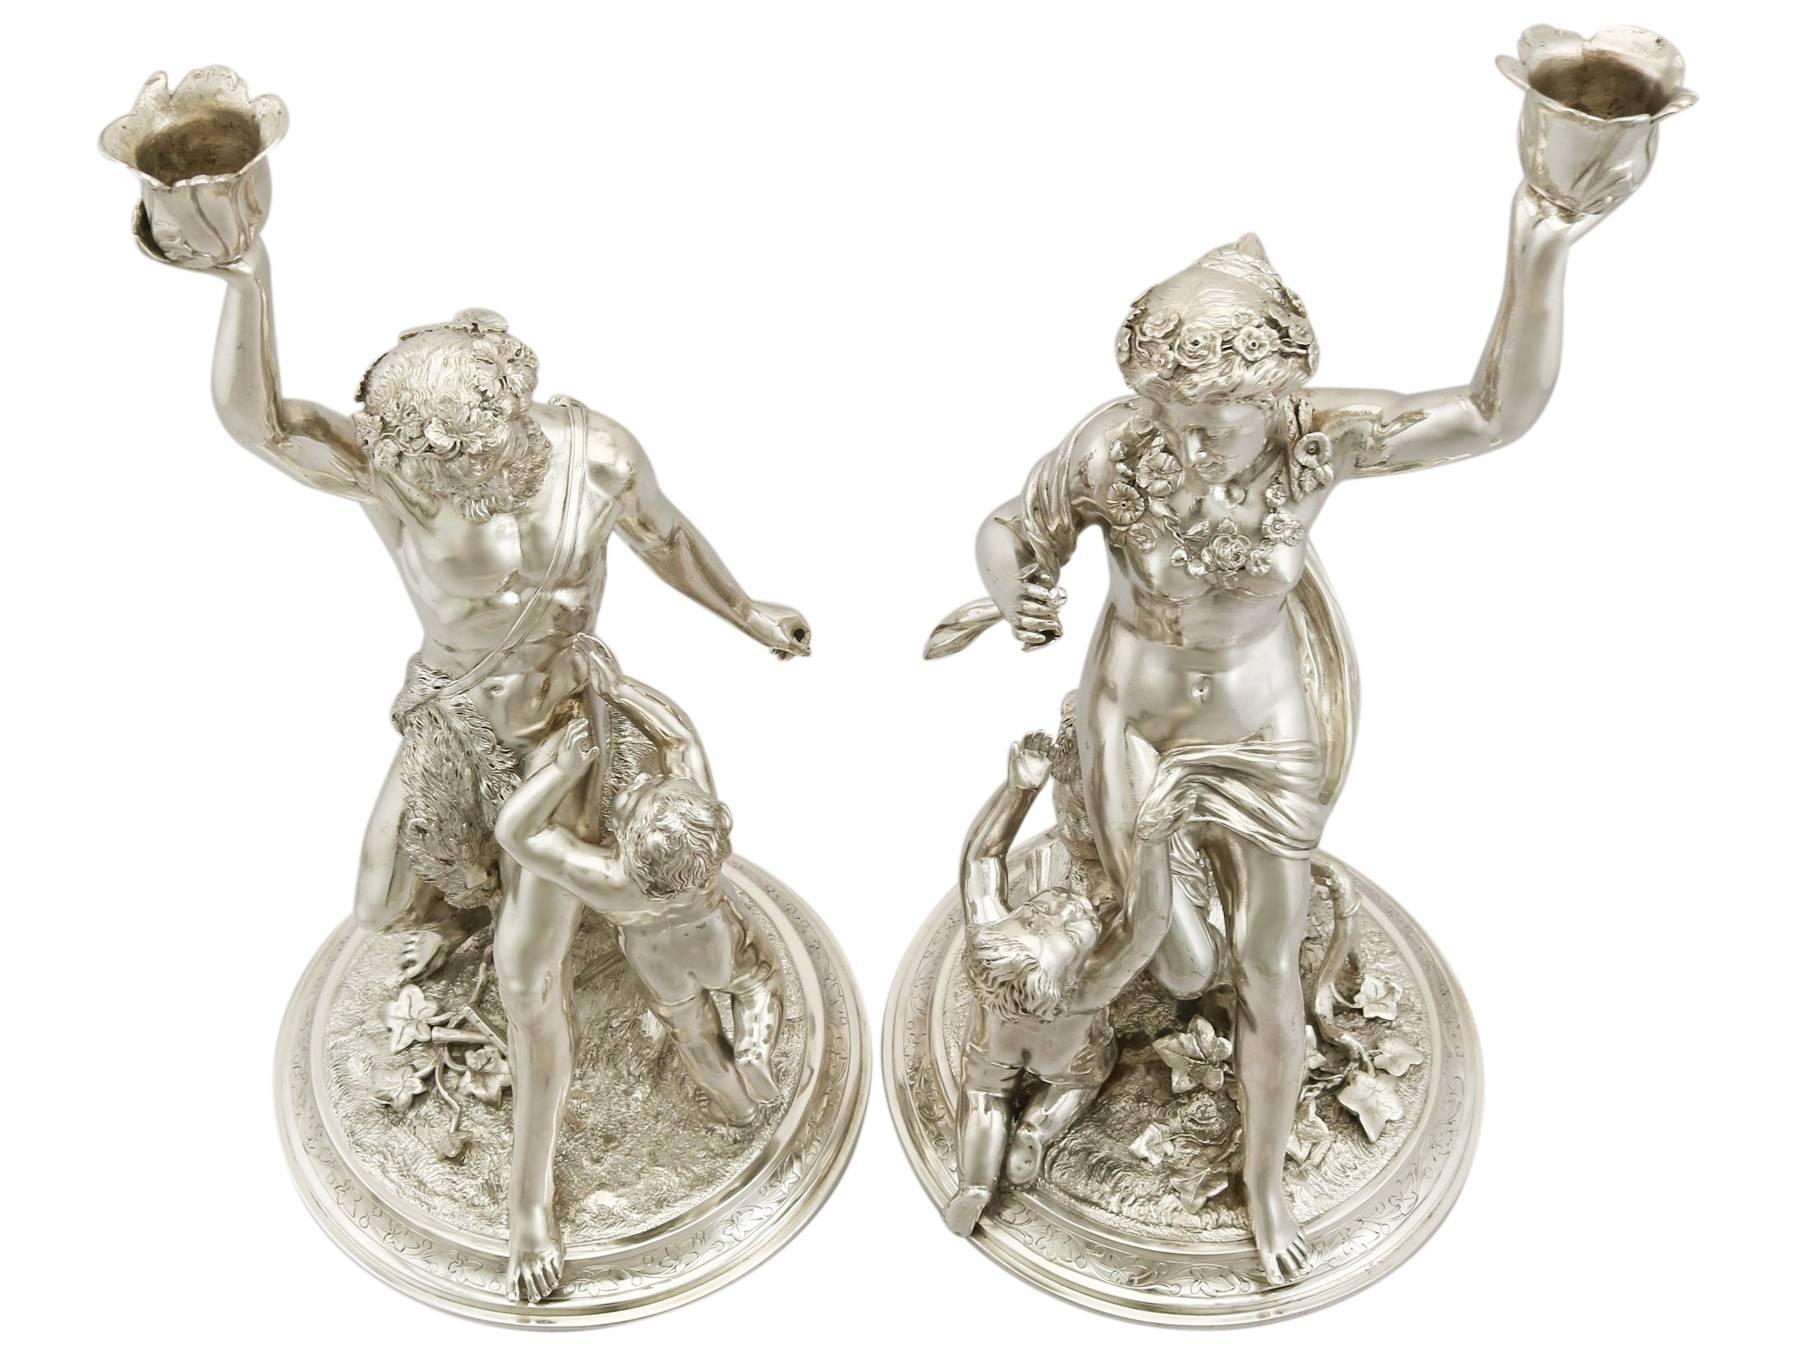 A magnificent, fine and impressive pair of antique Victorian English cast sterling silver figural candlesticks; an addition of our ornamental silverware collection

These magnificent antique Victorian cast sterling silver candlesticks have been